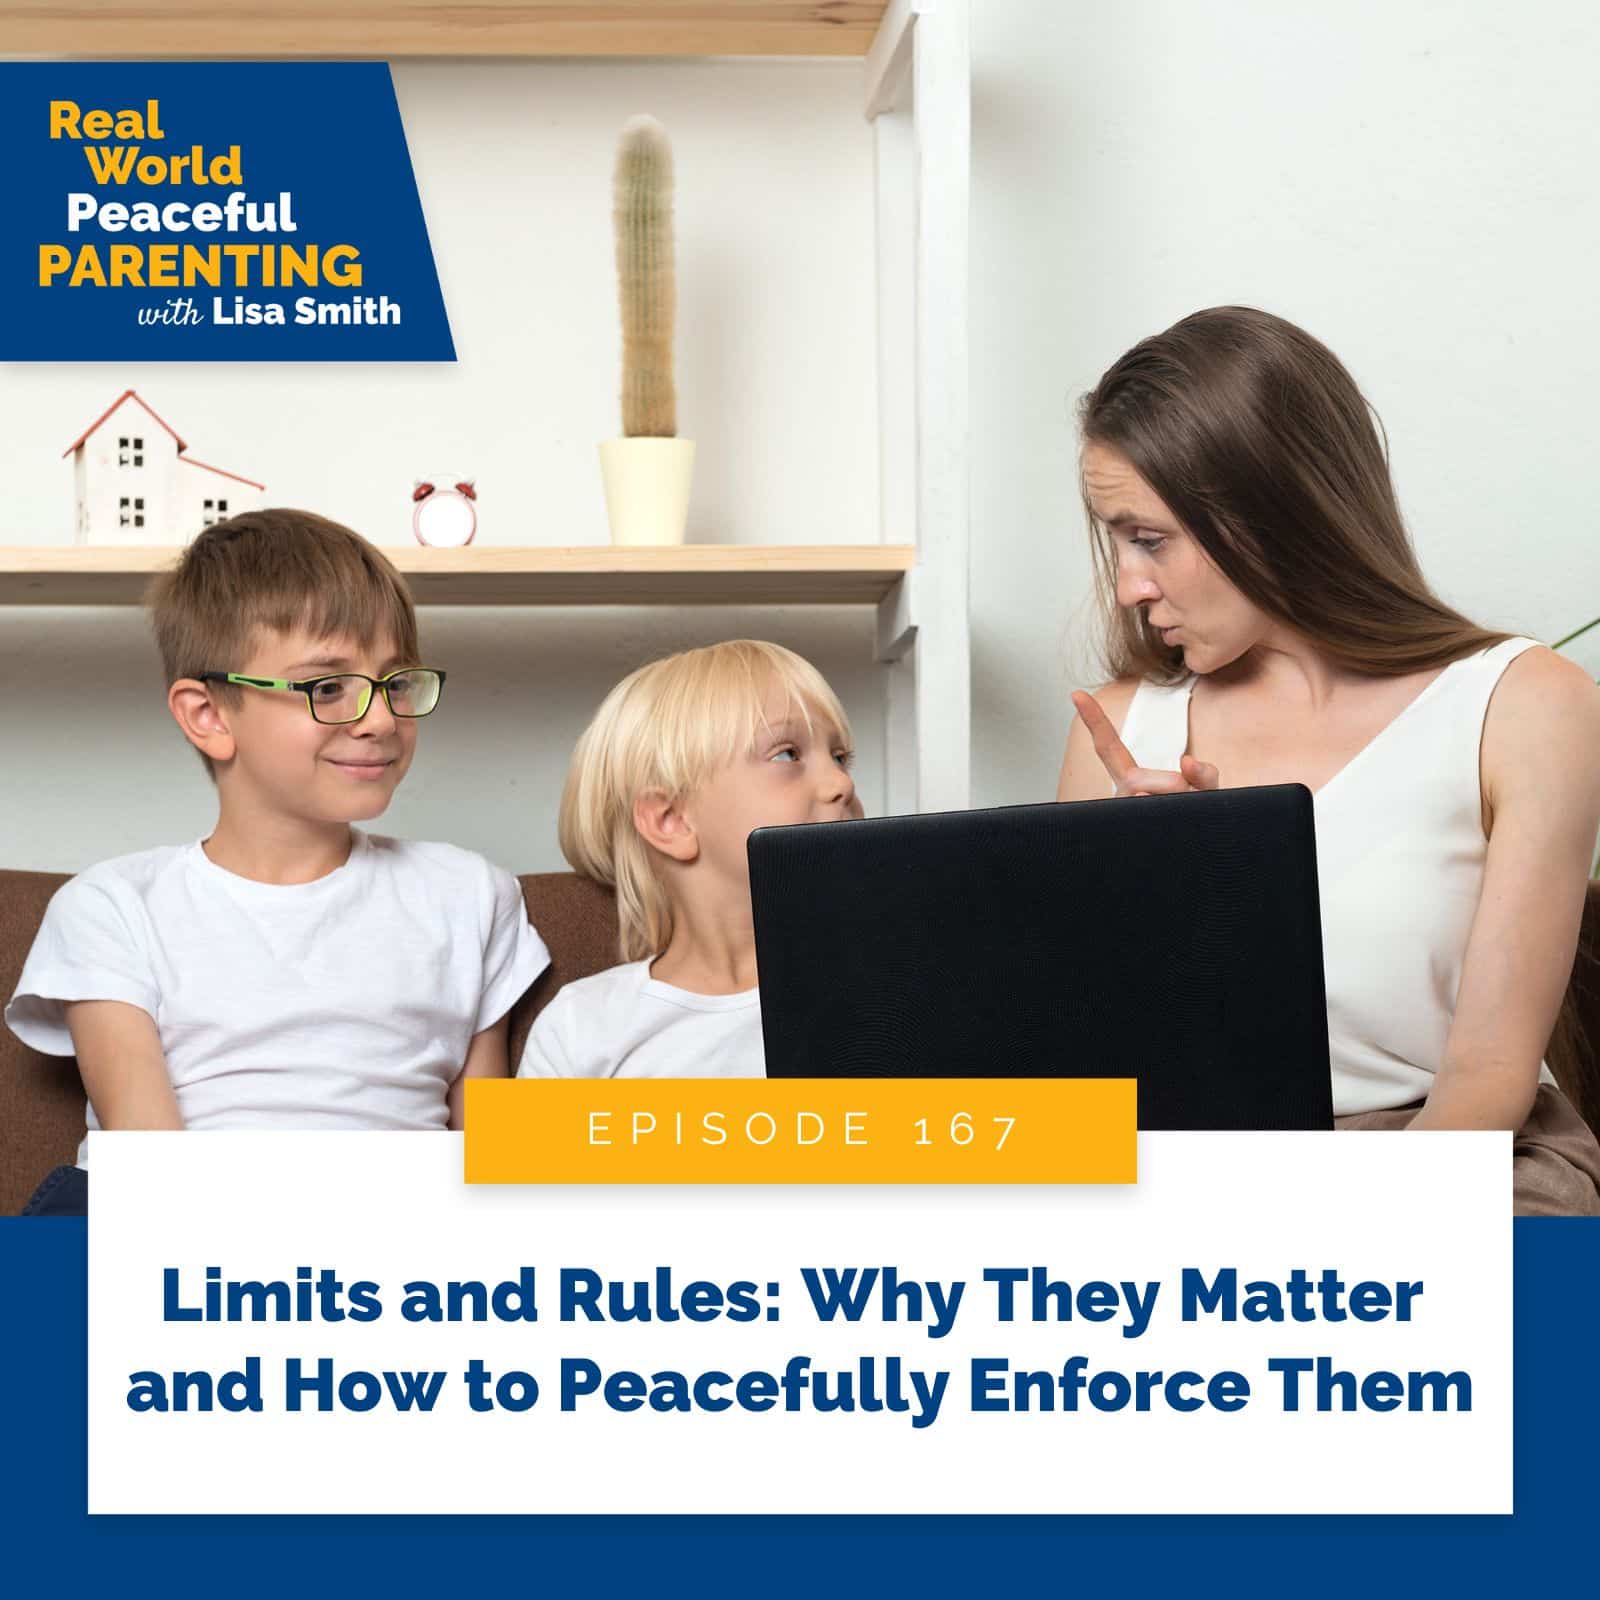 Real World Peaceful Parenting with Lisa Smith | Limits and Rules: Why They Matter and How to Peacefully Enforce Them